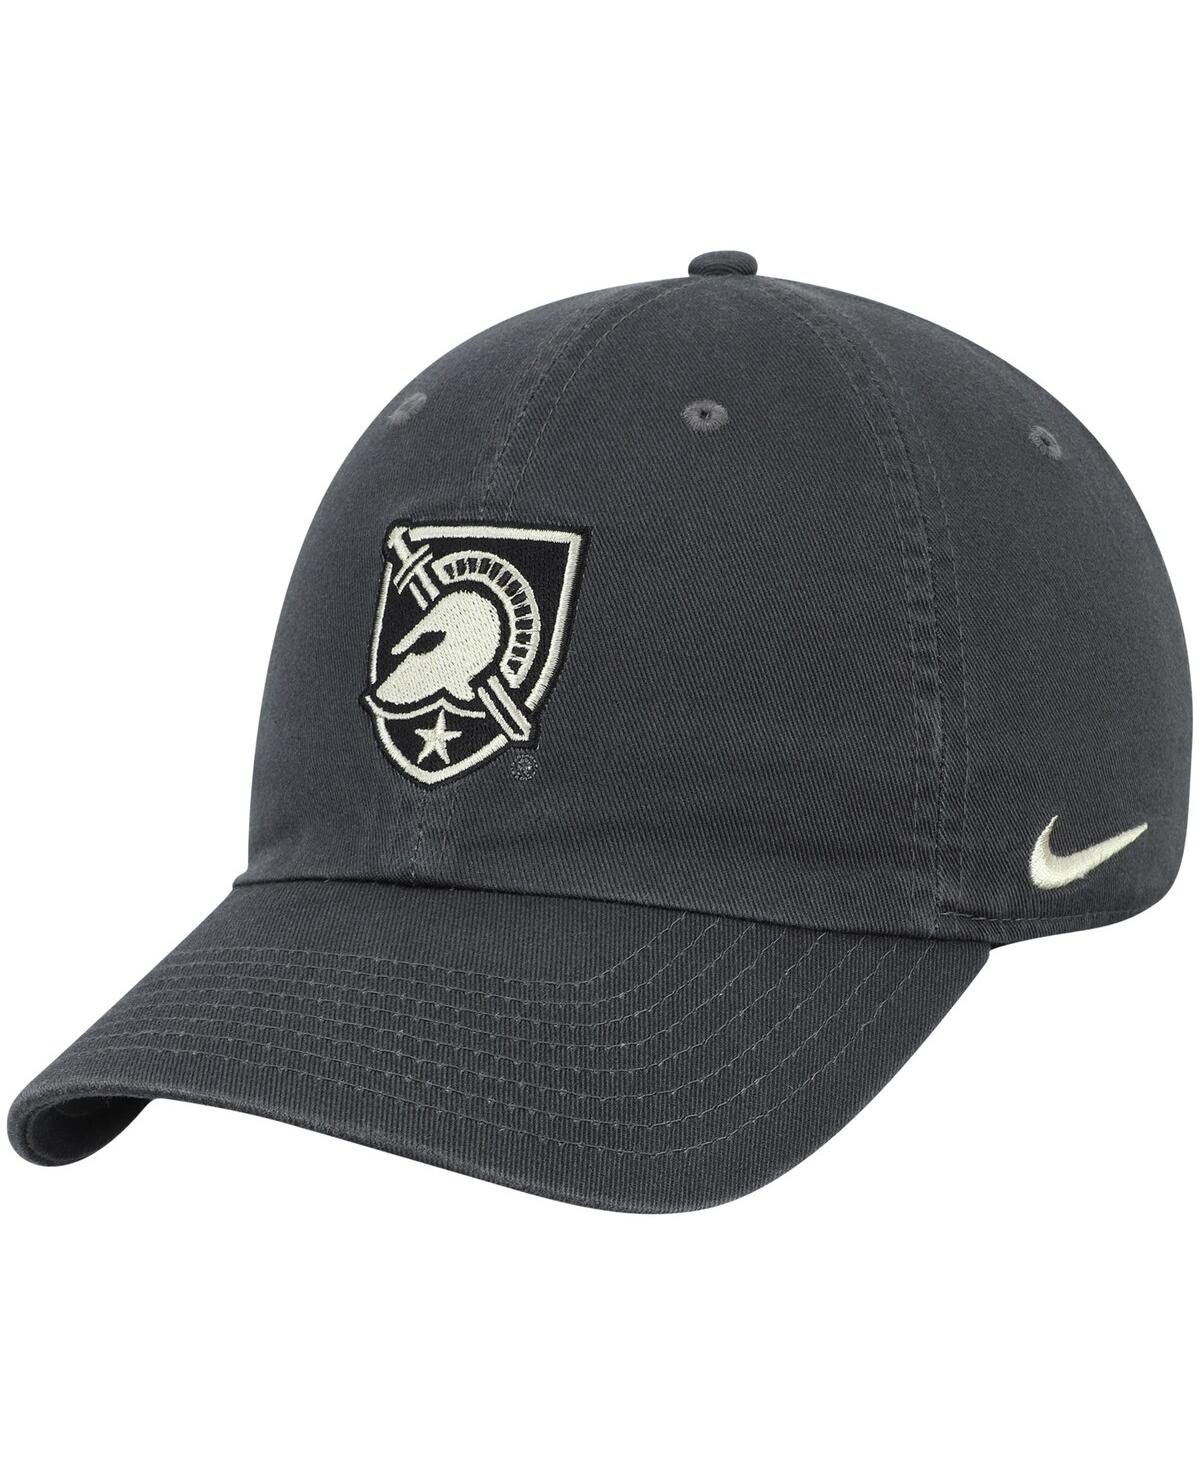 Nike Men's Anthracite Army Black Knights Heritage 86 Performance ...